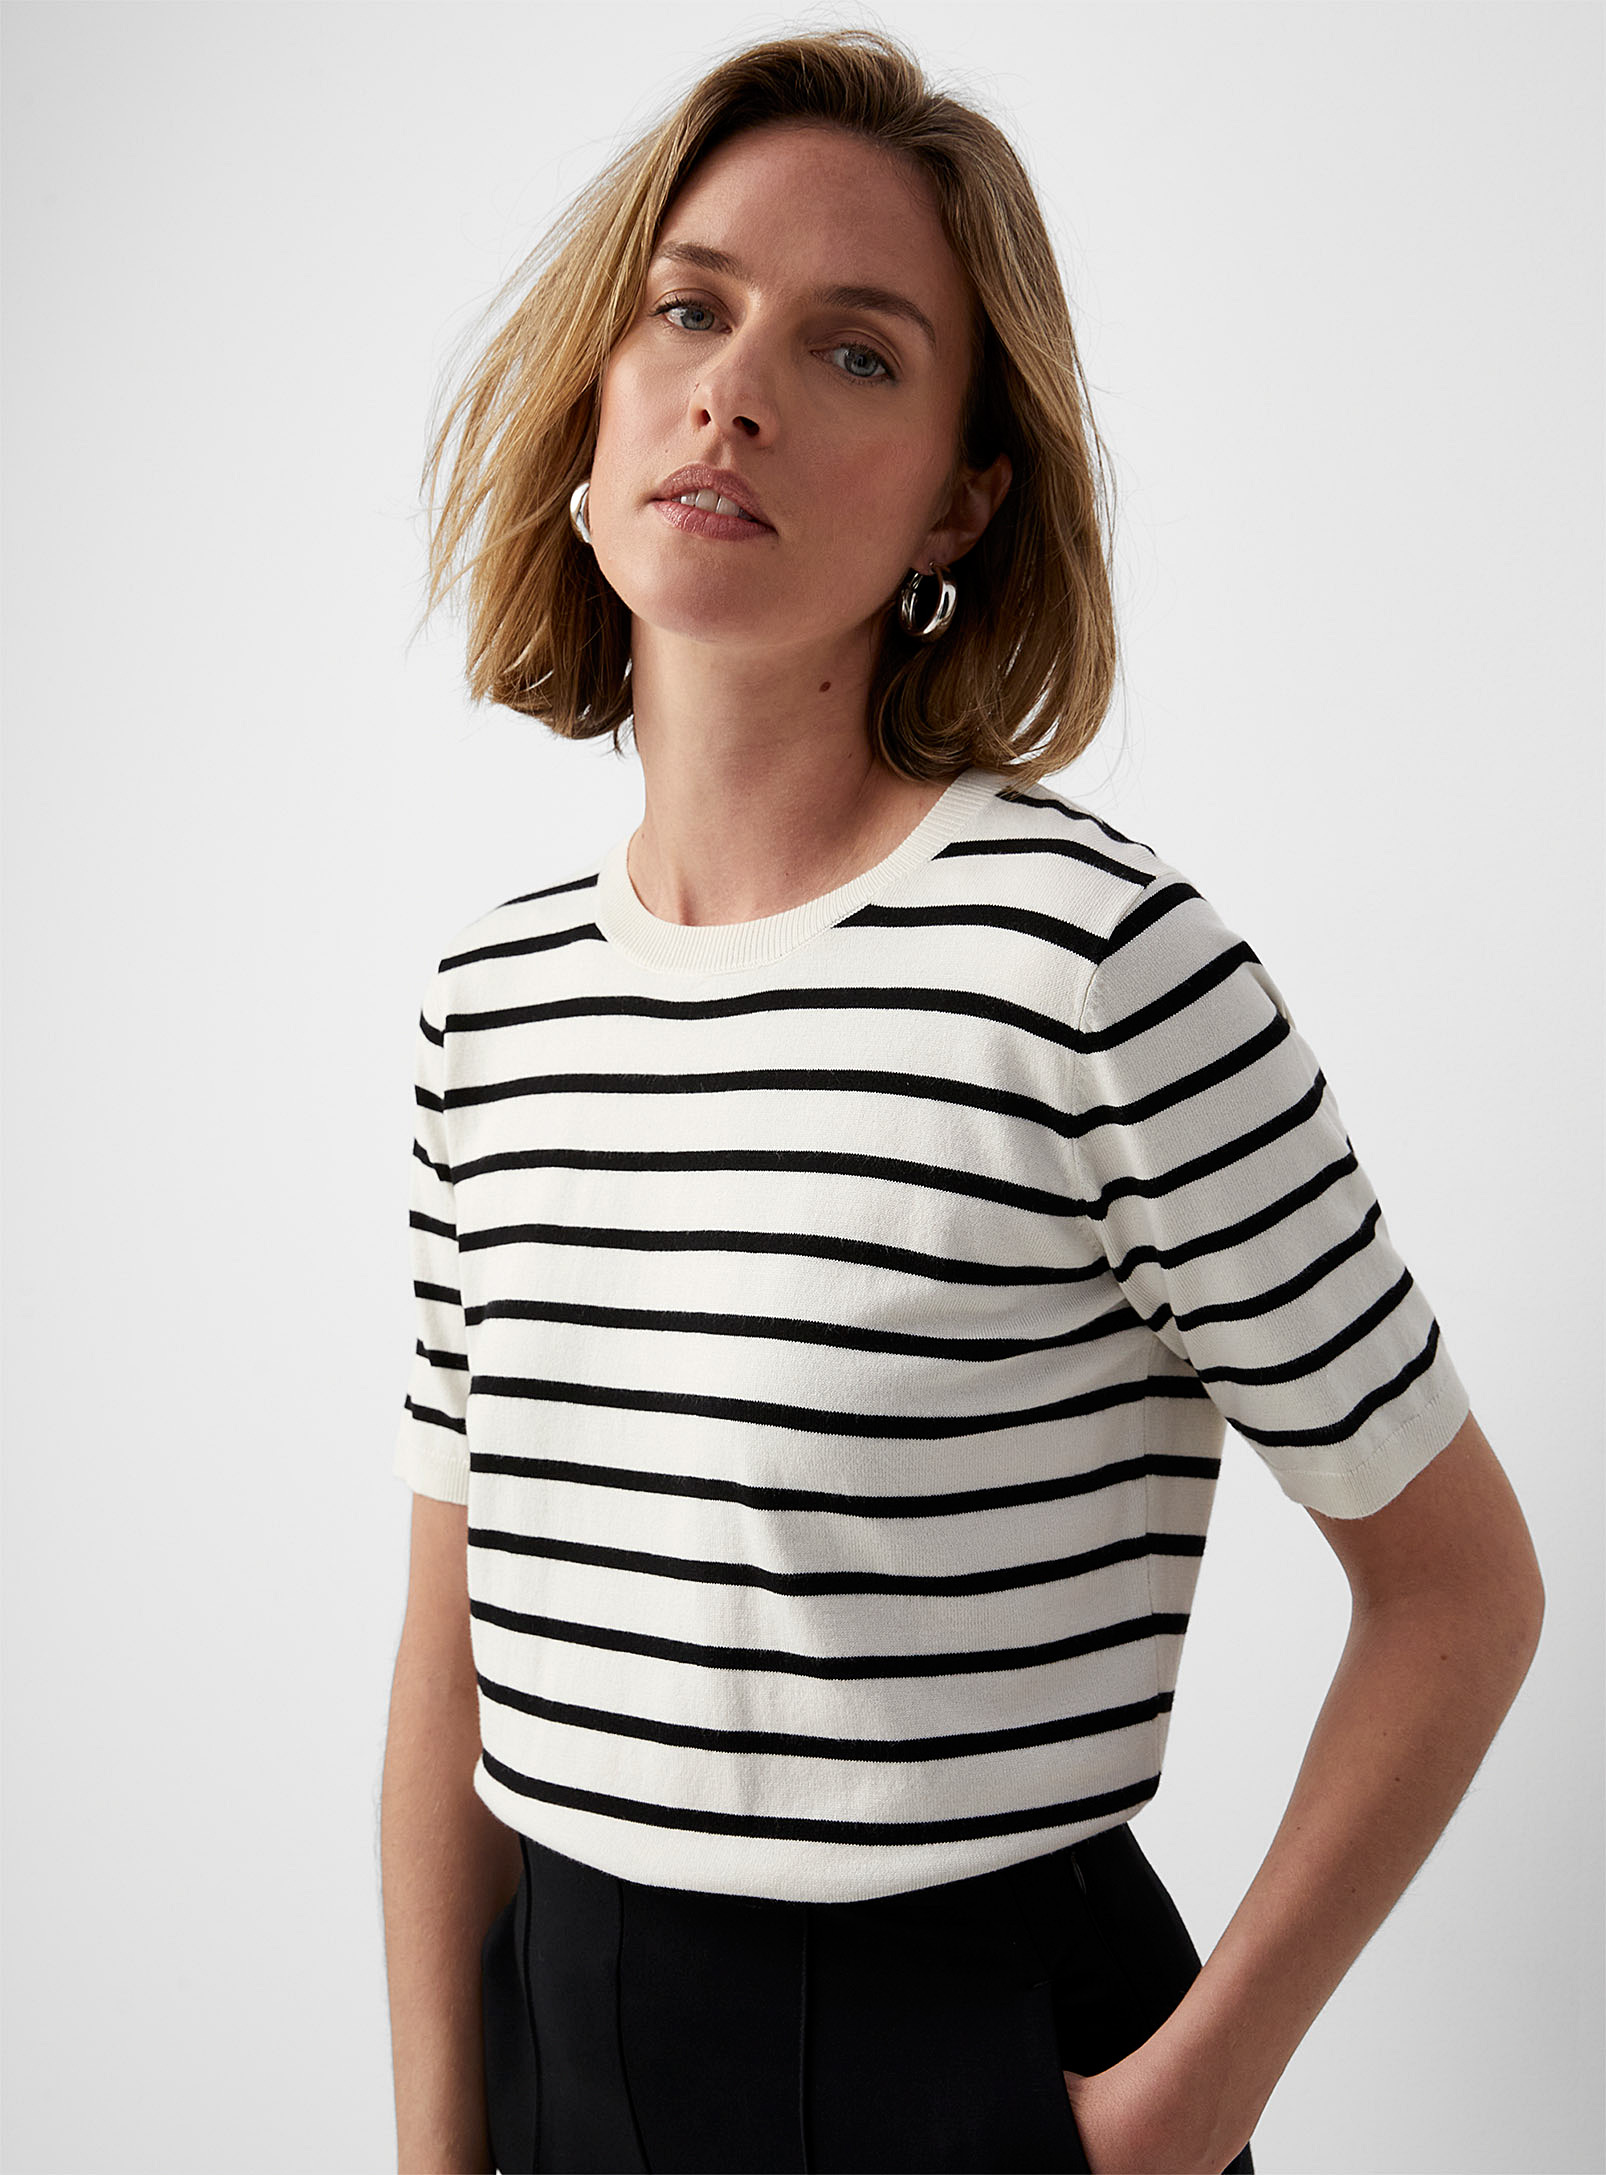 Contemporaine Short-sleeve Lightweight Sweater In Patterned White